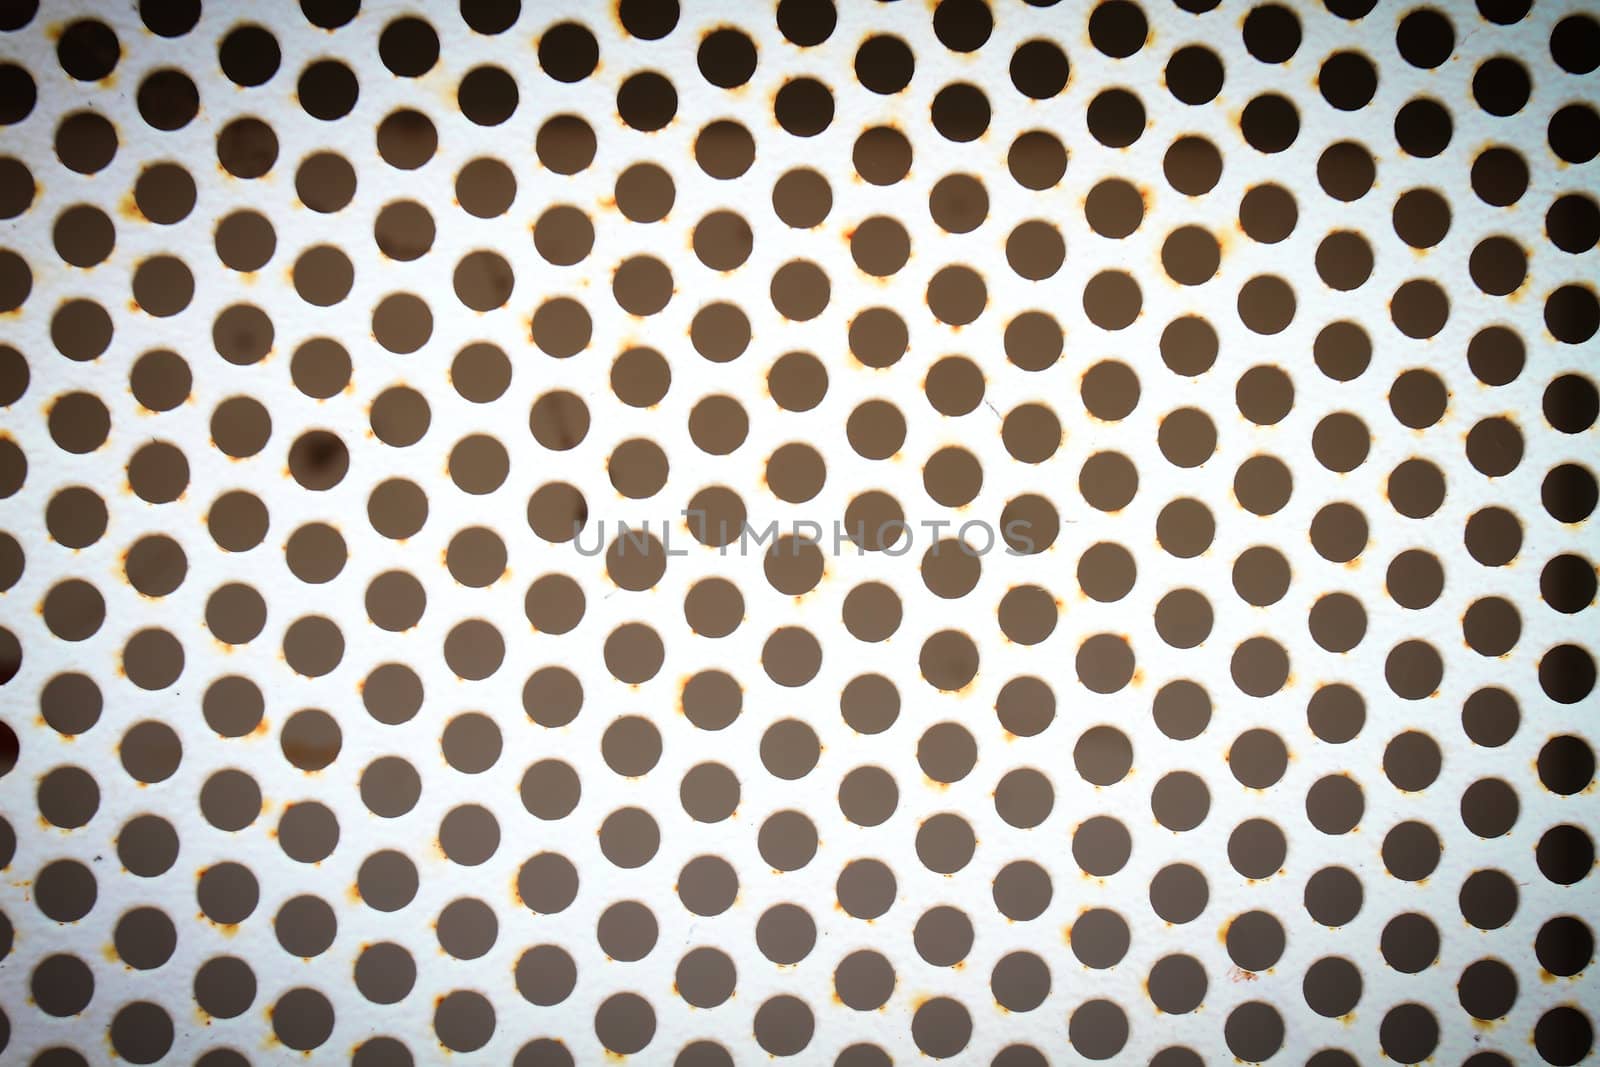 metal background with perforated holes